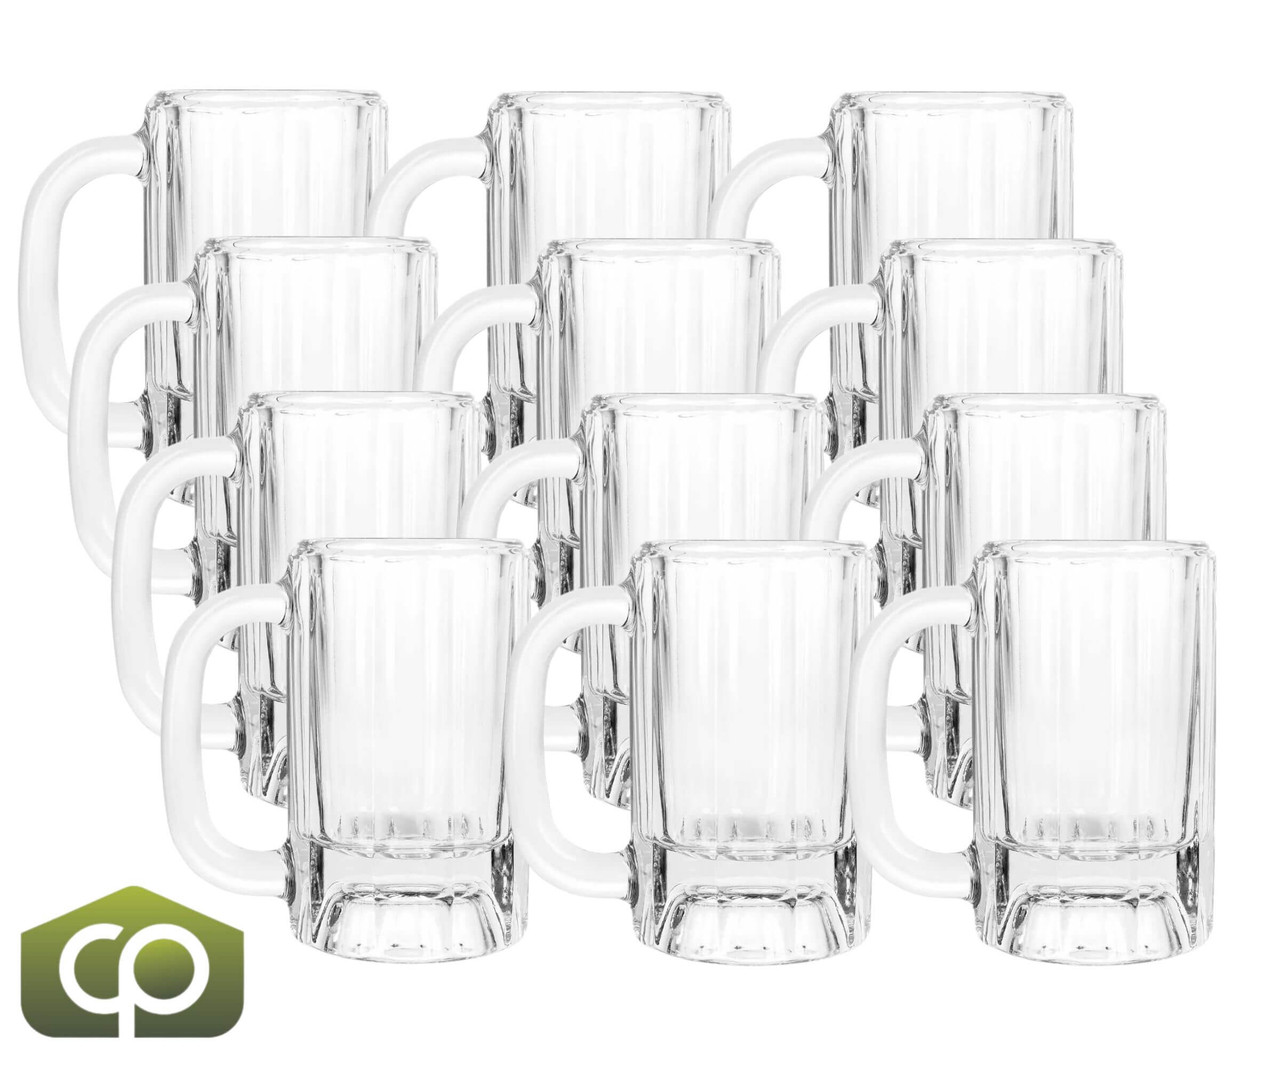 Libbey 5019 10 oz Paneled Mug, Clear Glass, Sturdy Handle, Thick Base, 12/Case - Chicken Pieces